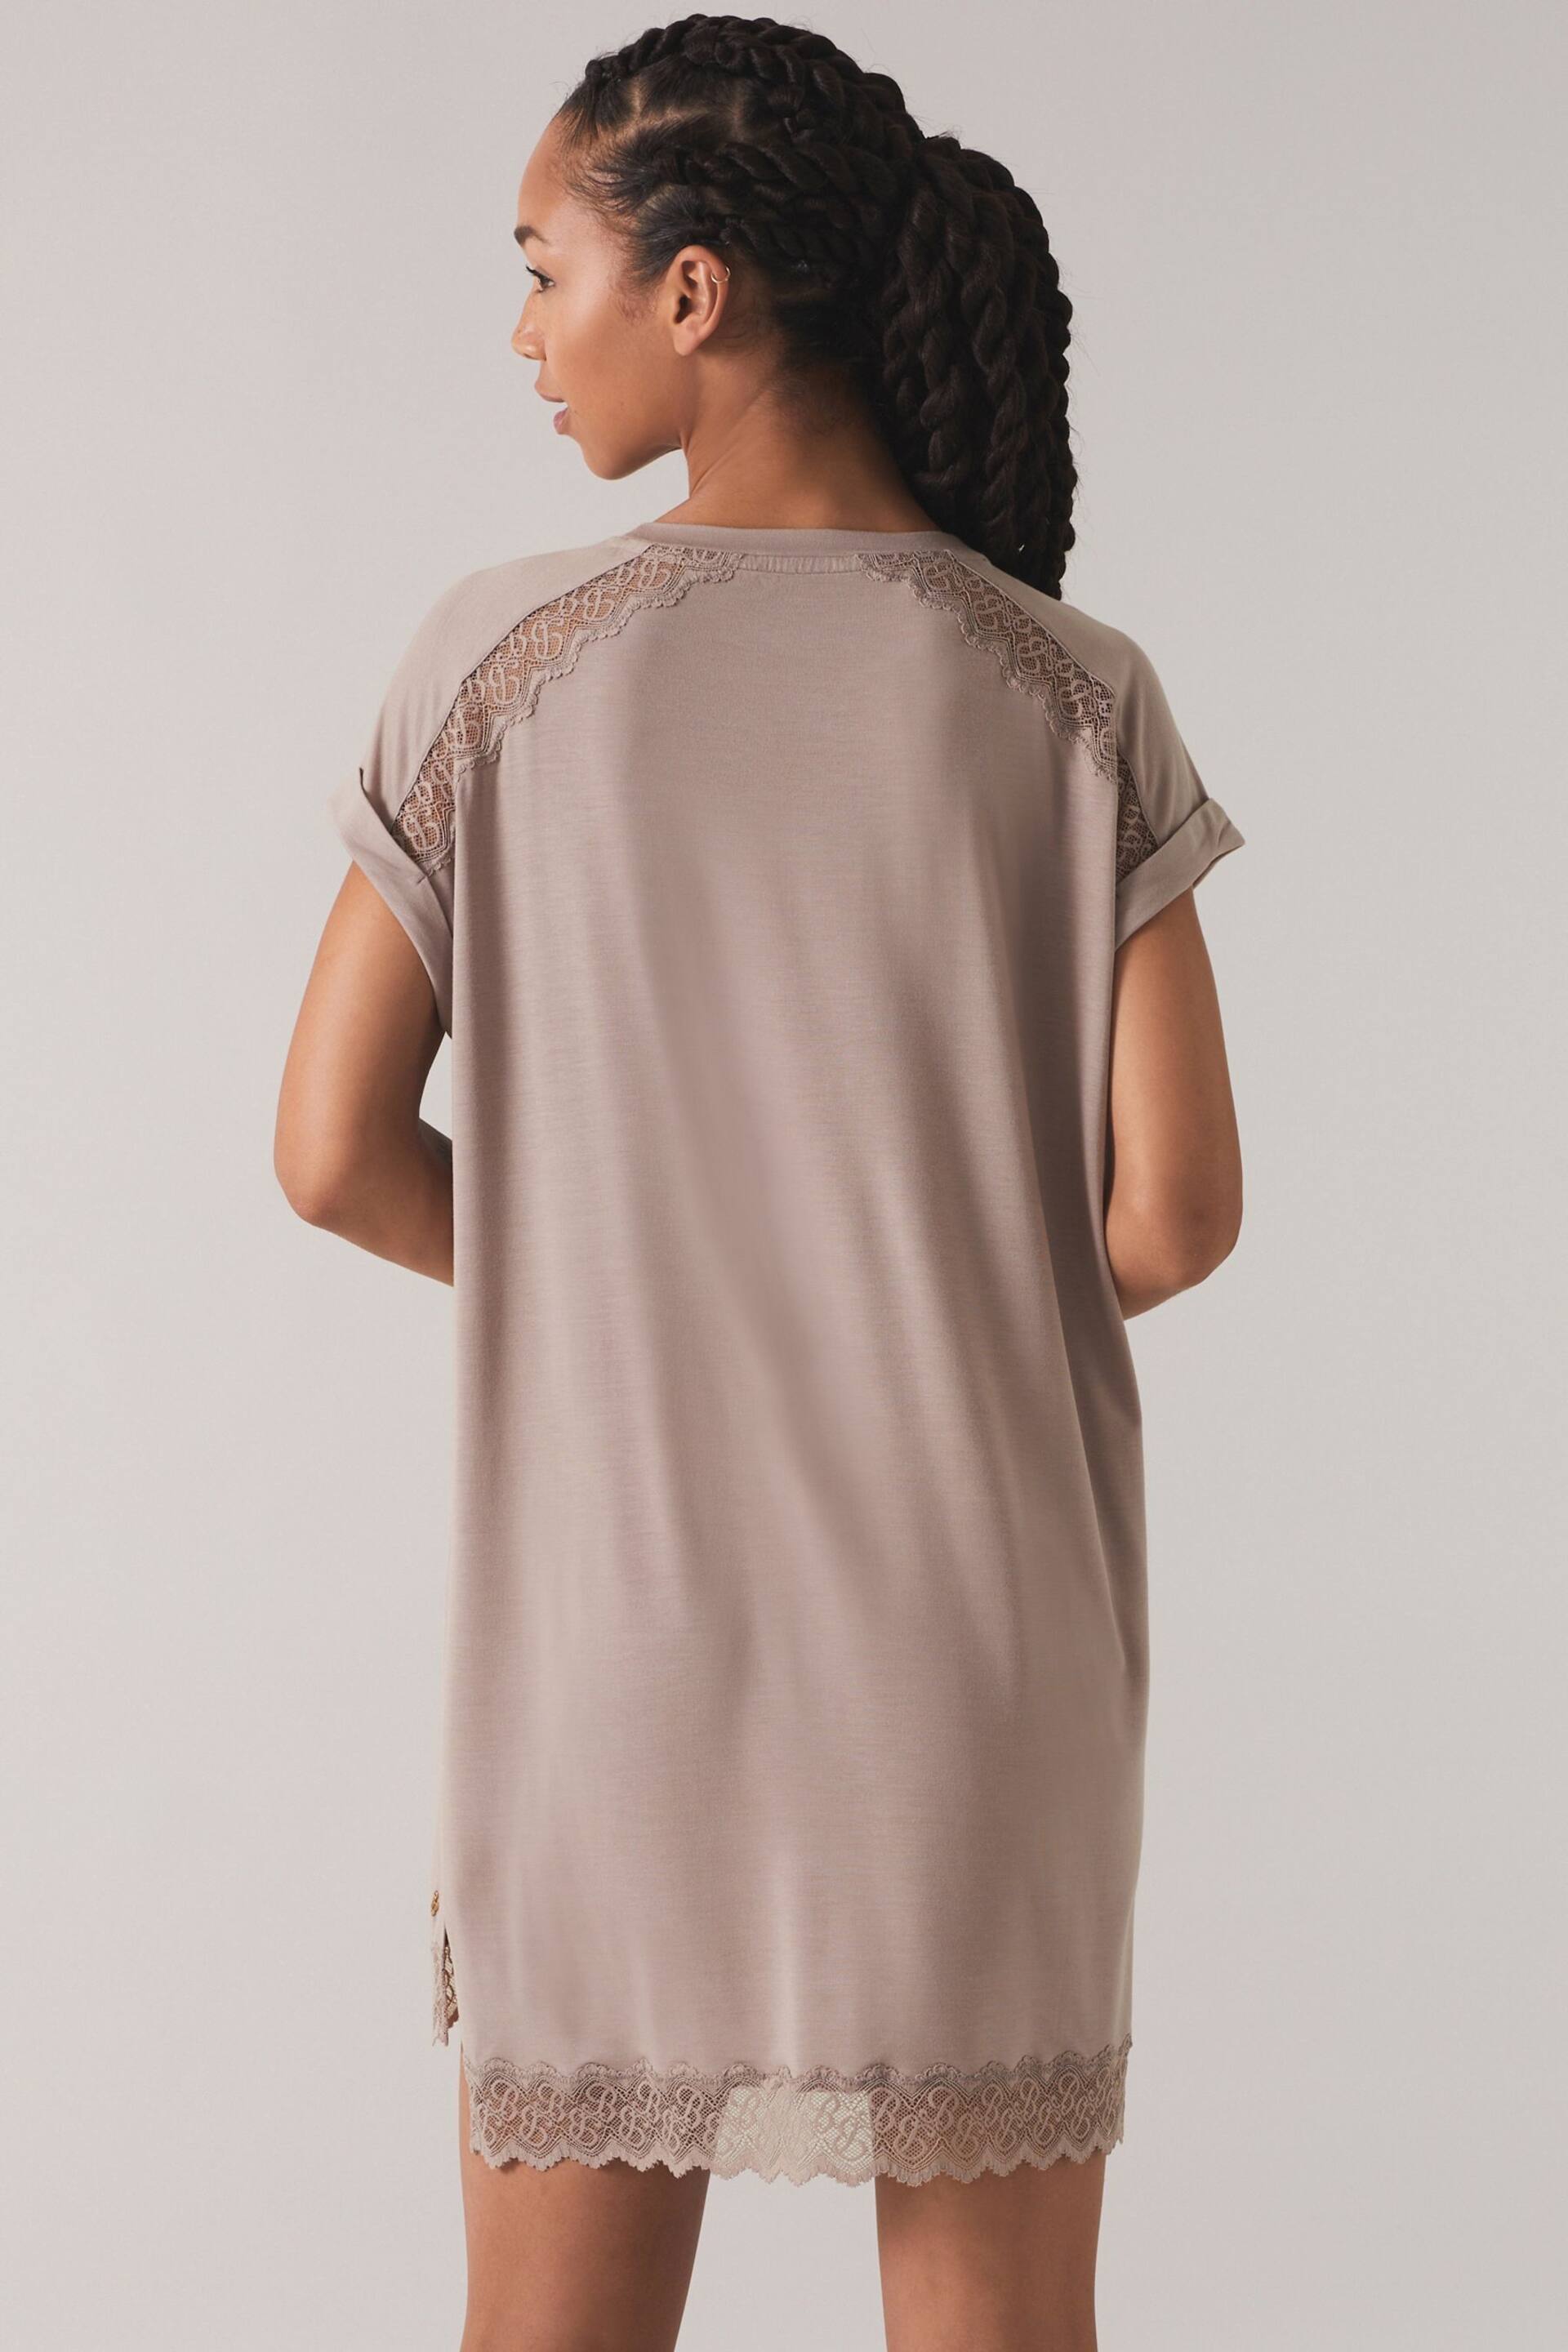 B by Ted Baker Mink Modal Tunics Top - Image 3 of 8